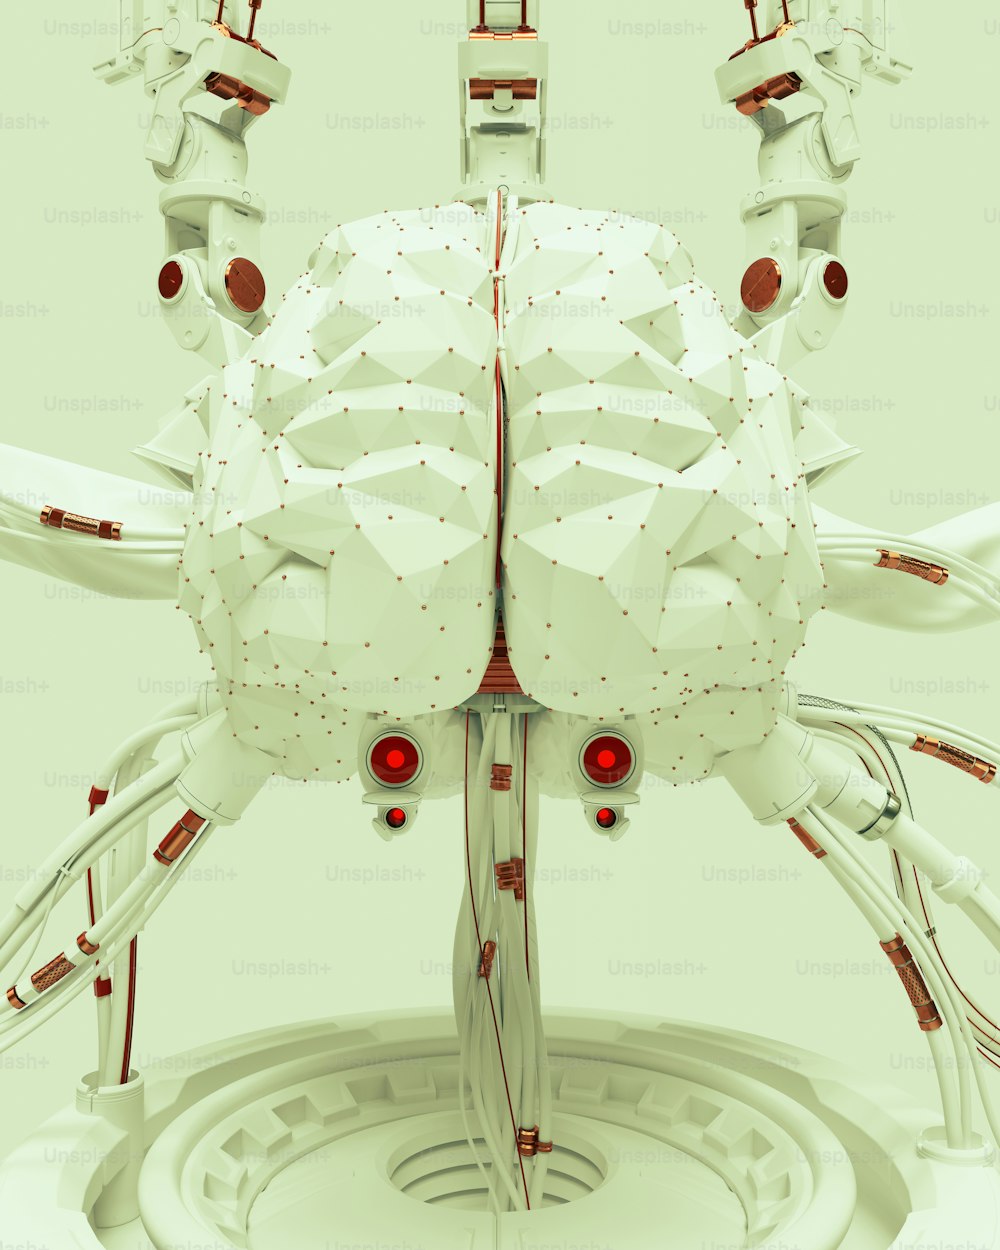 a computer generated image of a white robot with red eyes